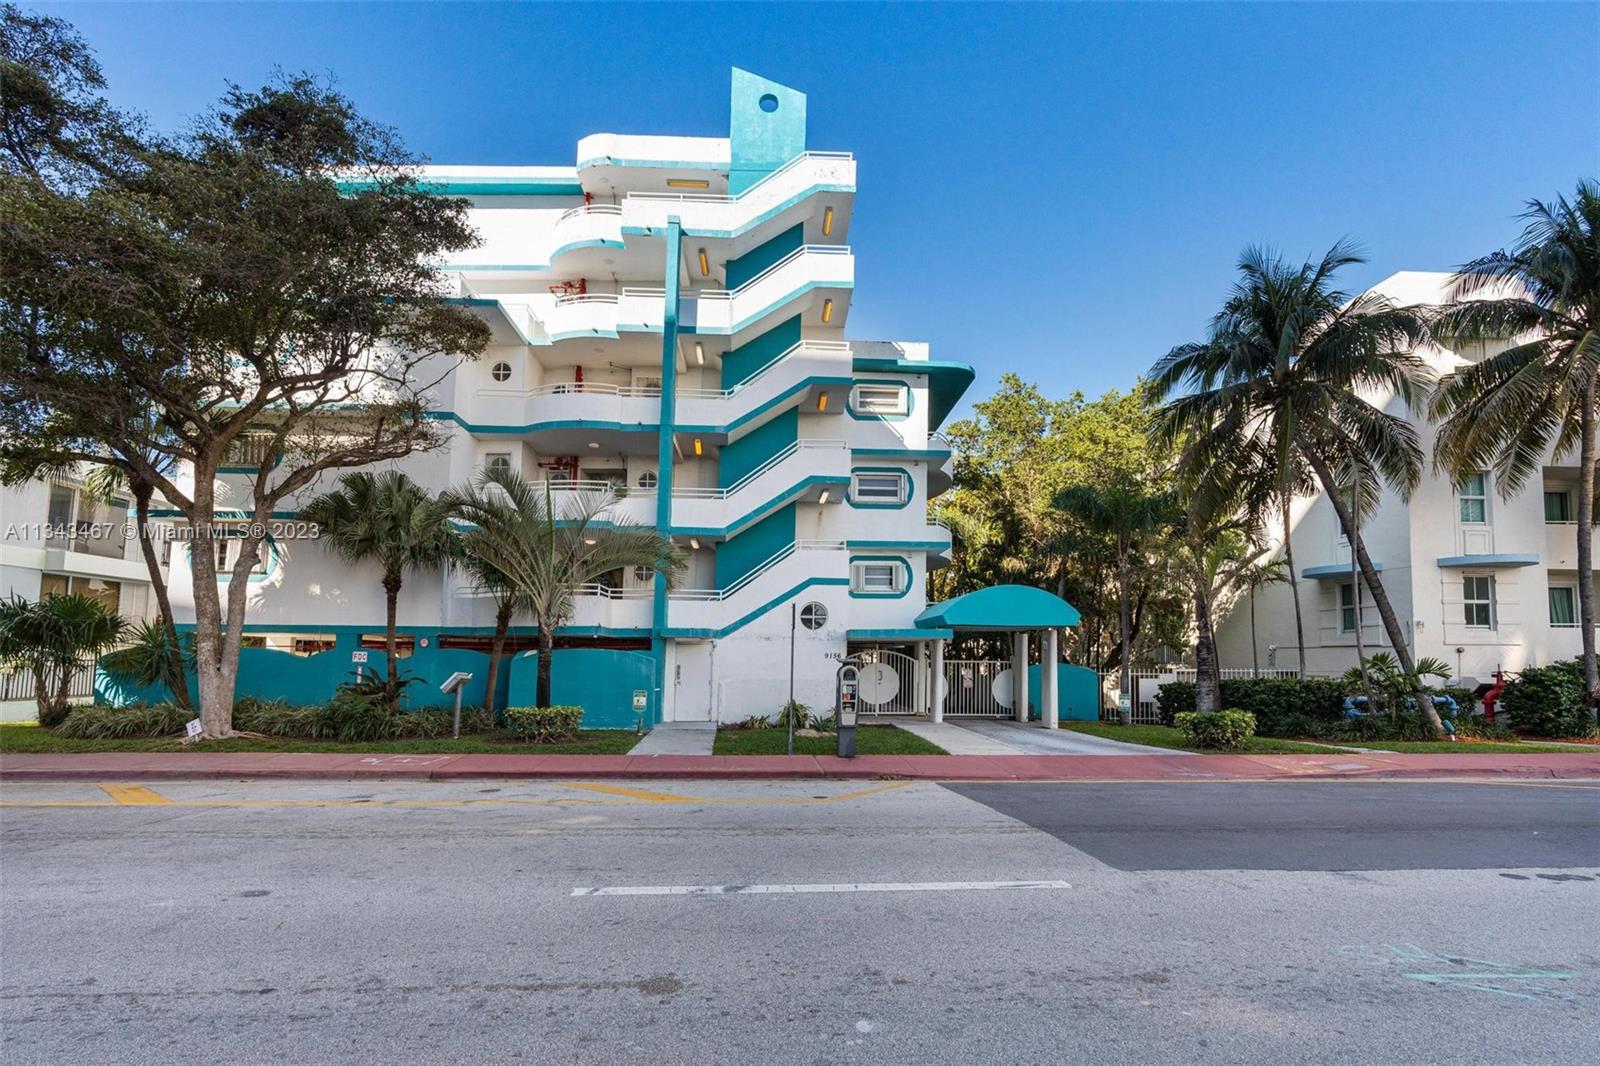 Beautiful Spacious 2/2.5 Condo just across the street from the Ocean with Beach Access! Great Surfside location! Some features include: each bedroom has its own bath inside, washer/dryer in the unit, nice balcony and assigned covered parking space #40.

The building amenities includes: Pool, Jacuzzi and Storage Space #208. You are close to Publix, Banks, restaurants, post office, and much more. You are also just south from Bal Harbour shops with designer shopping and fine restaurants.  Perfect for Investor!